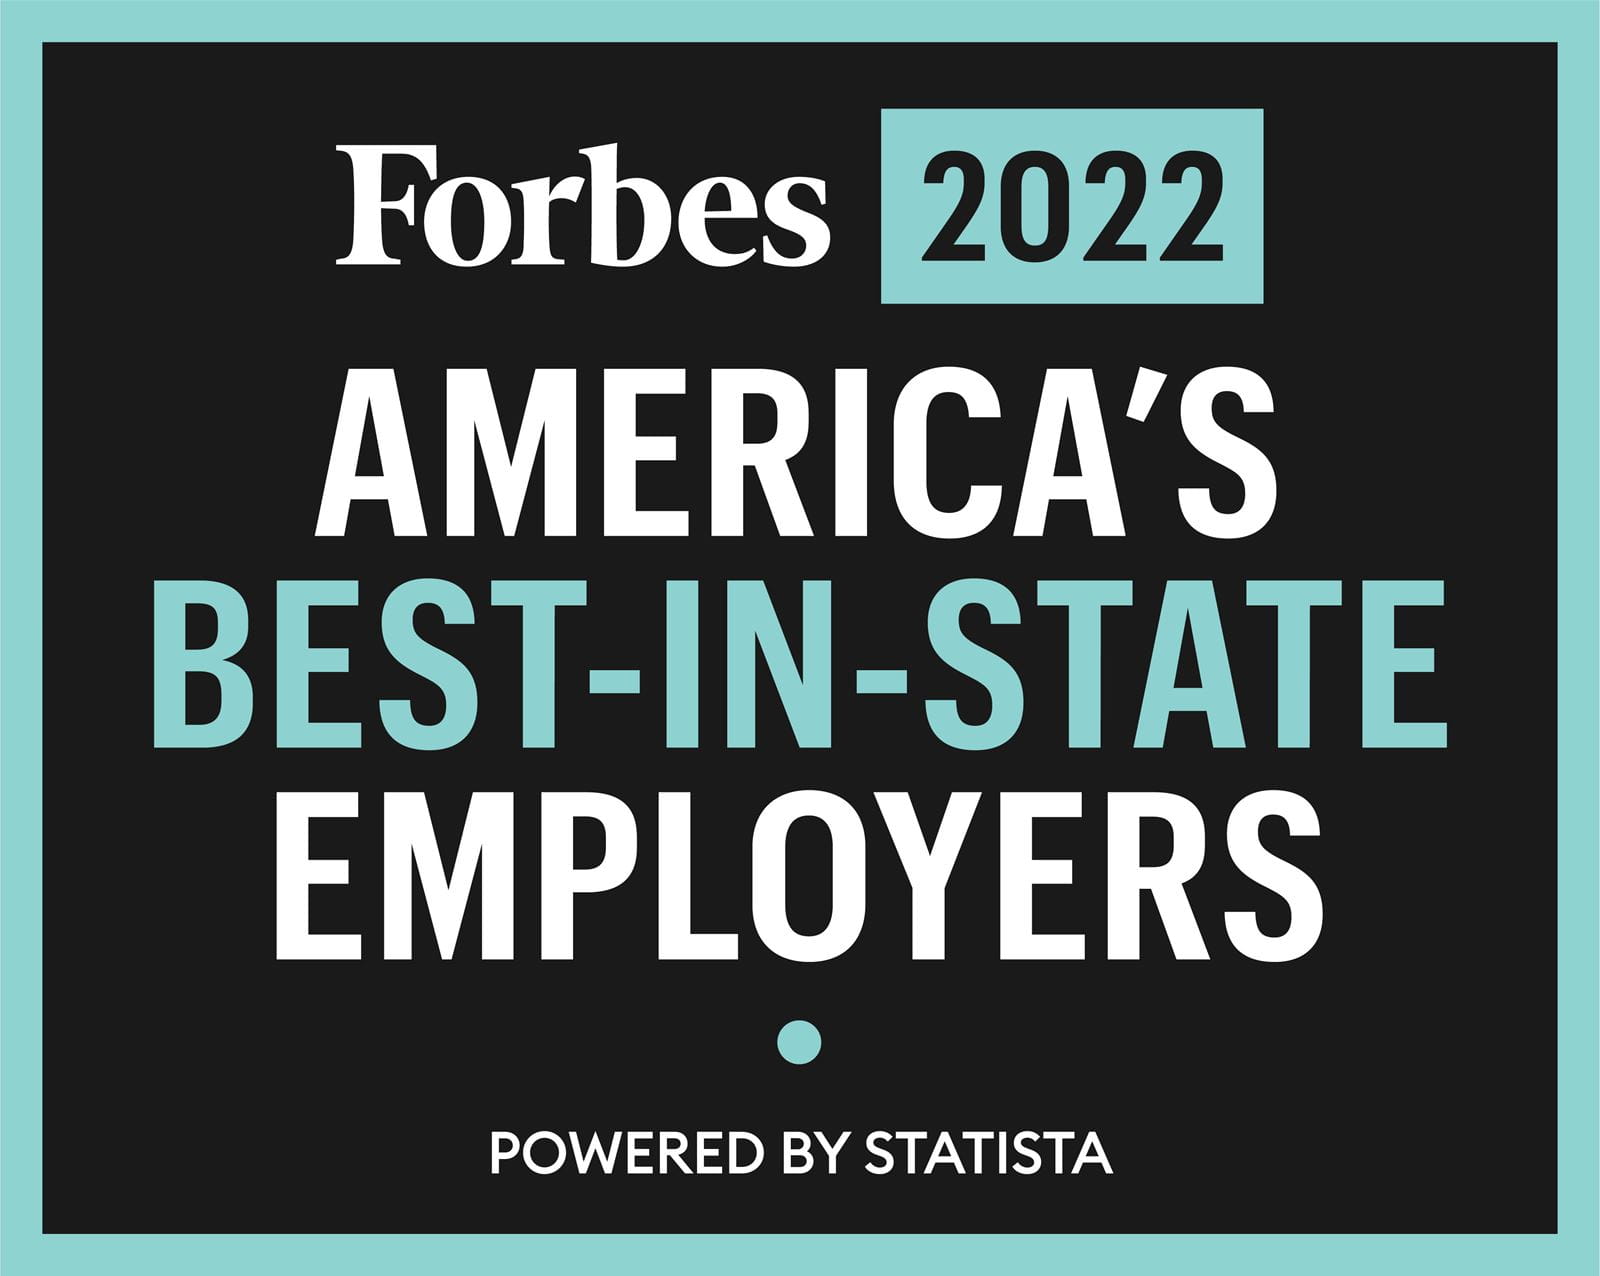 Forbes 2022 America's Best-in-State Employers logo